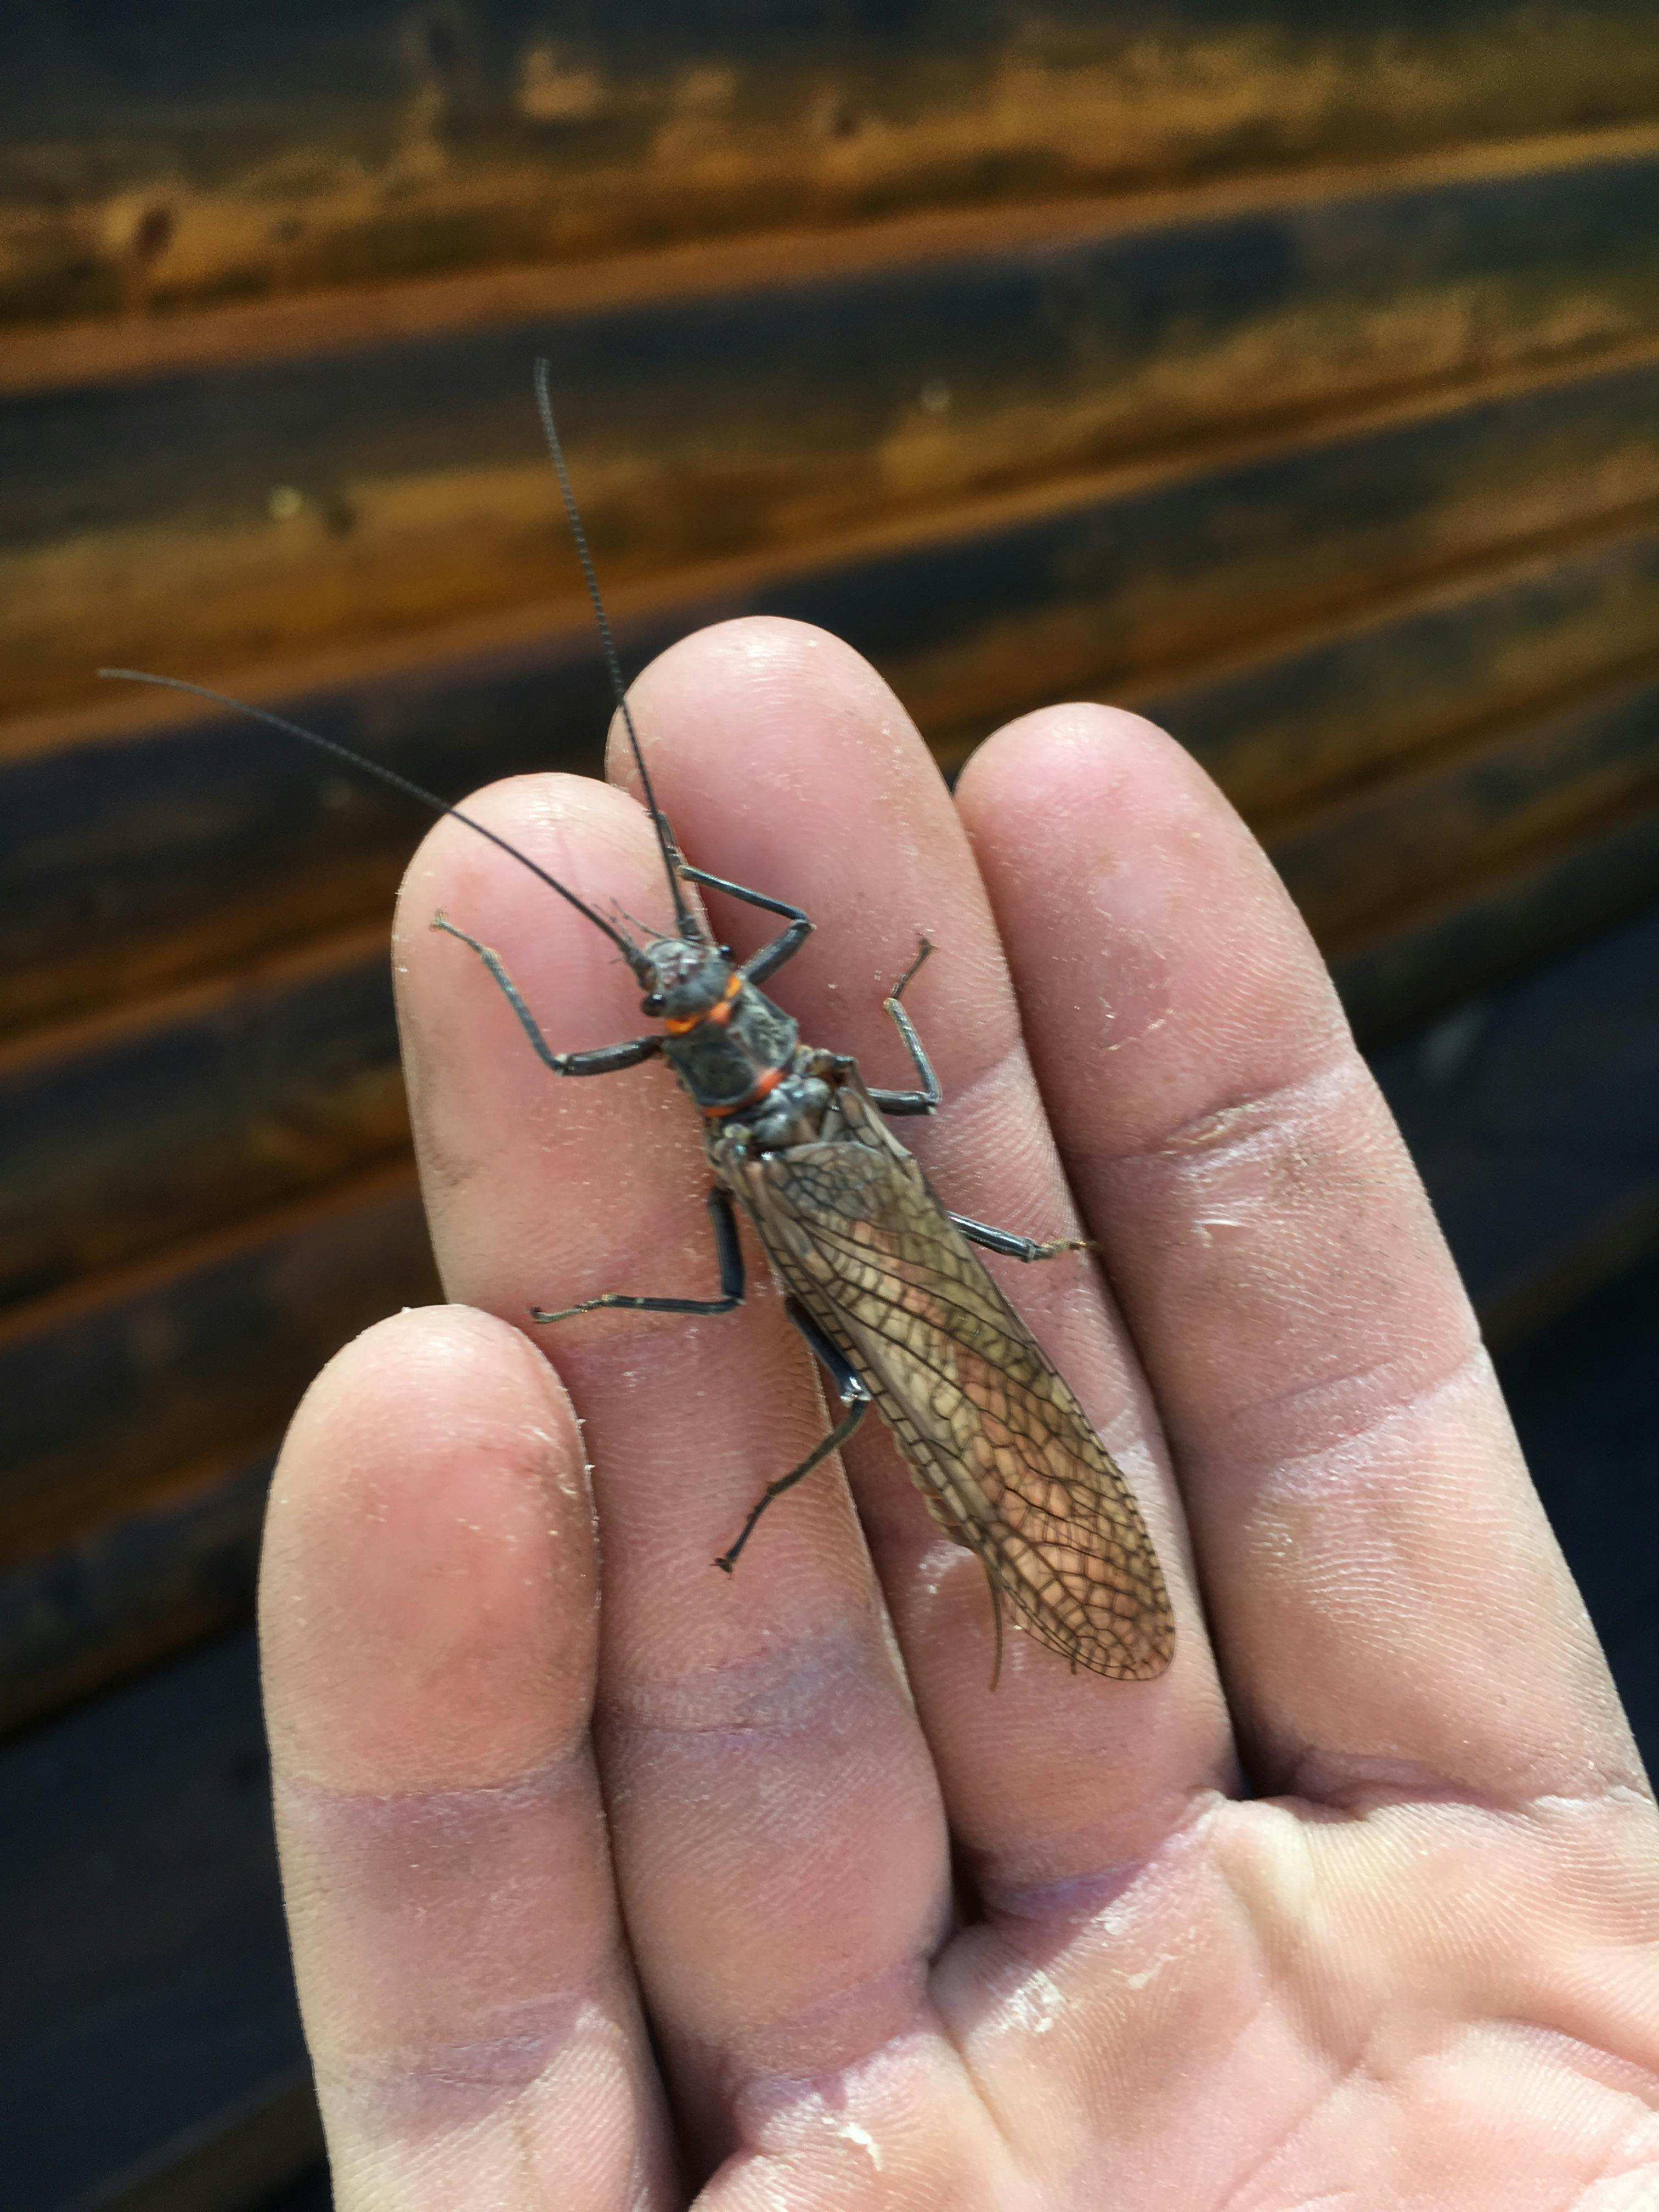 A large bug in a man's hand